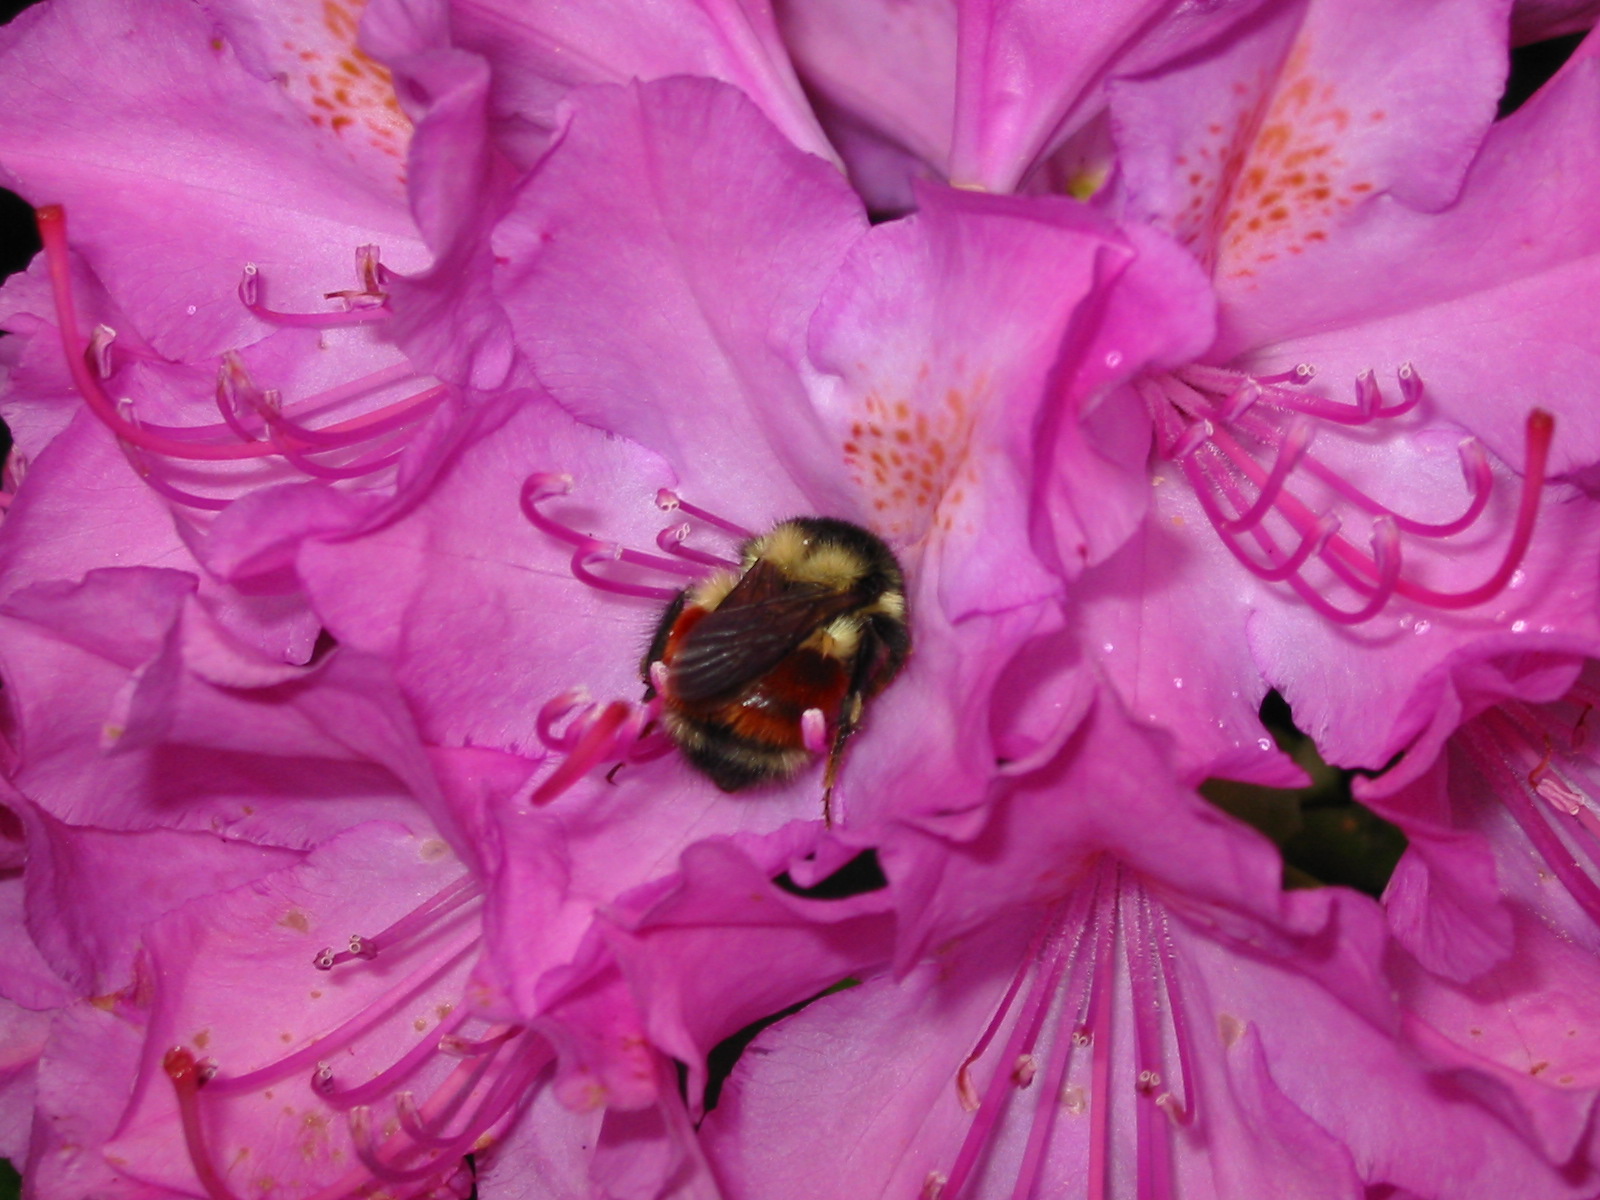 A fuzzy bumble bee is snuggled tight in a a pink rhododendron flower.